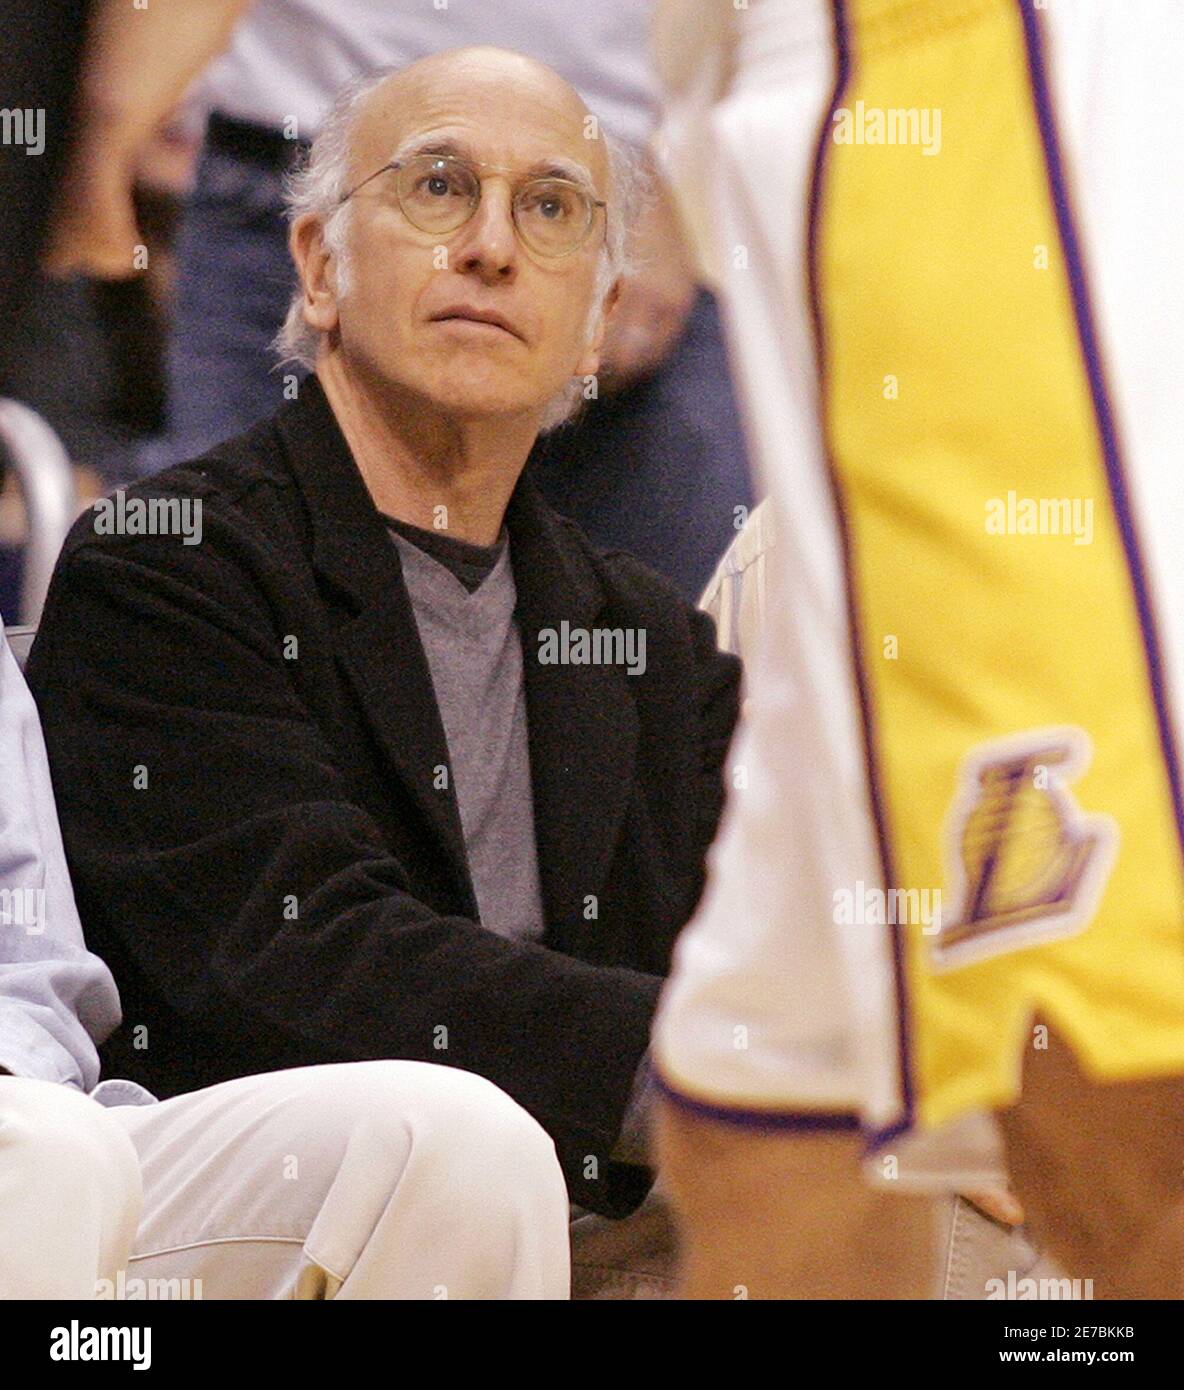 Actor and comedian Larry David, creator of the television programmes 'Seinfeld' and 'Curb Your Enthusiasm', watches the NBA game between the Los Angeles Lakers and the Chicago Bulls in Los Angeles November 20, 2005. The Bulls won 96-93. REUTERS/Danny Moloshok Stock Photo